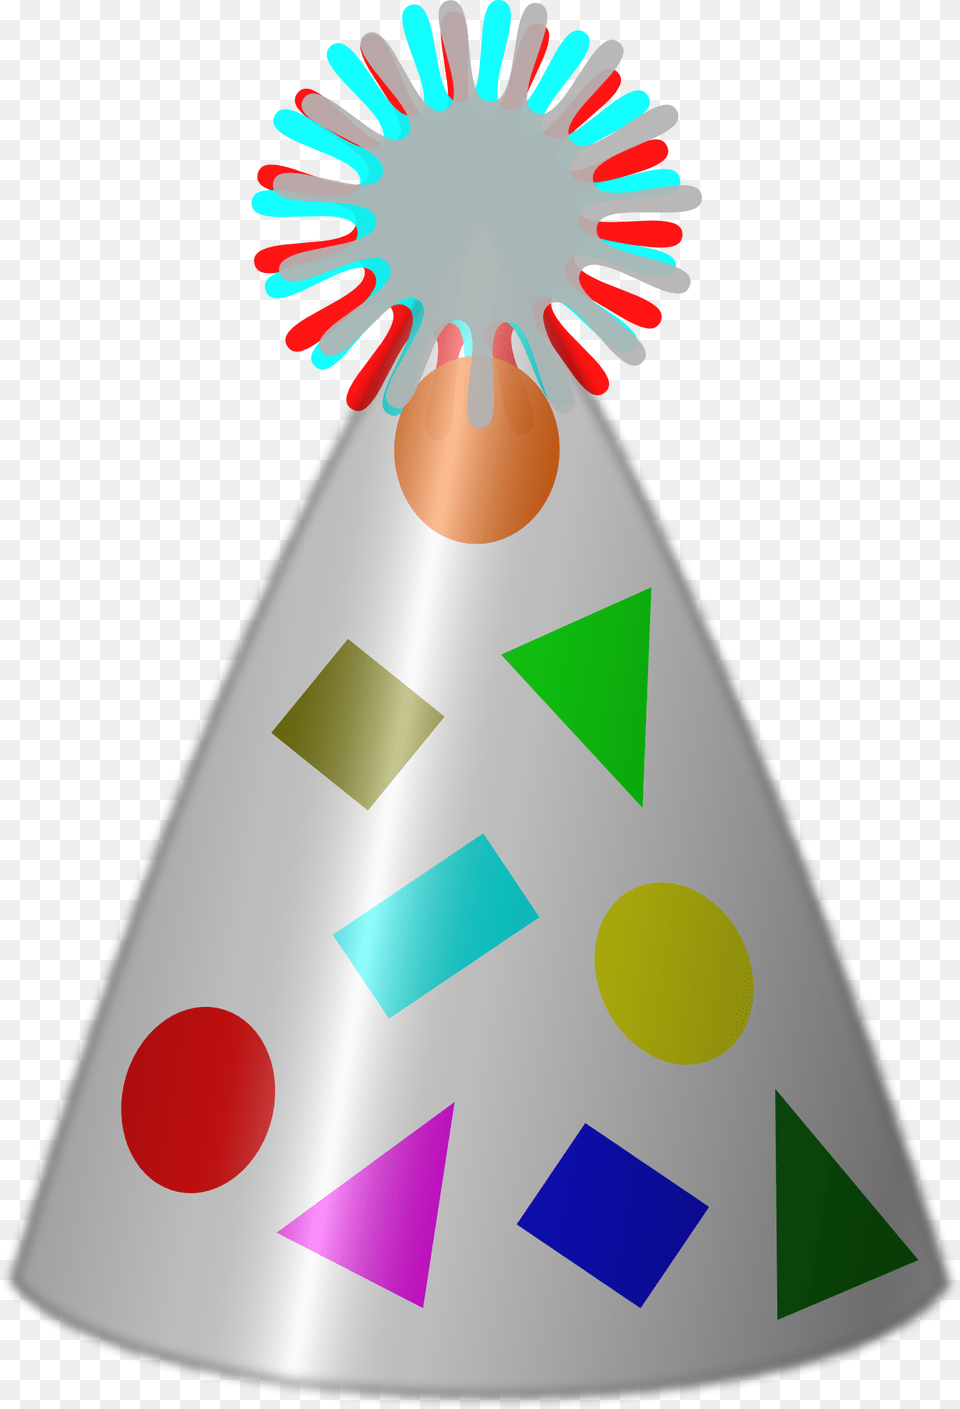 Birthday Hat, Clothing, Party Hat, Food, Ketchup Free Png